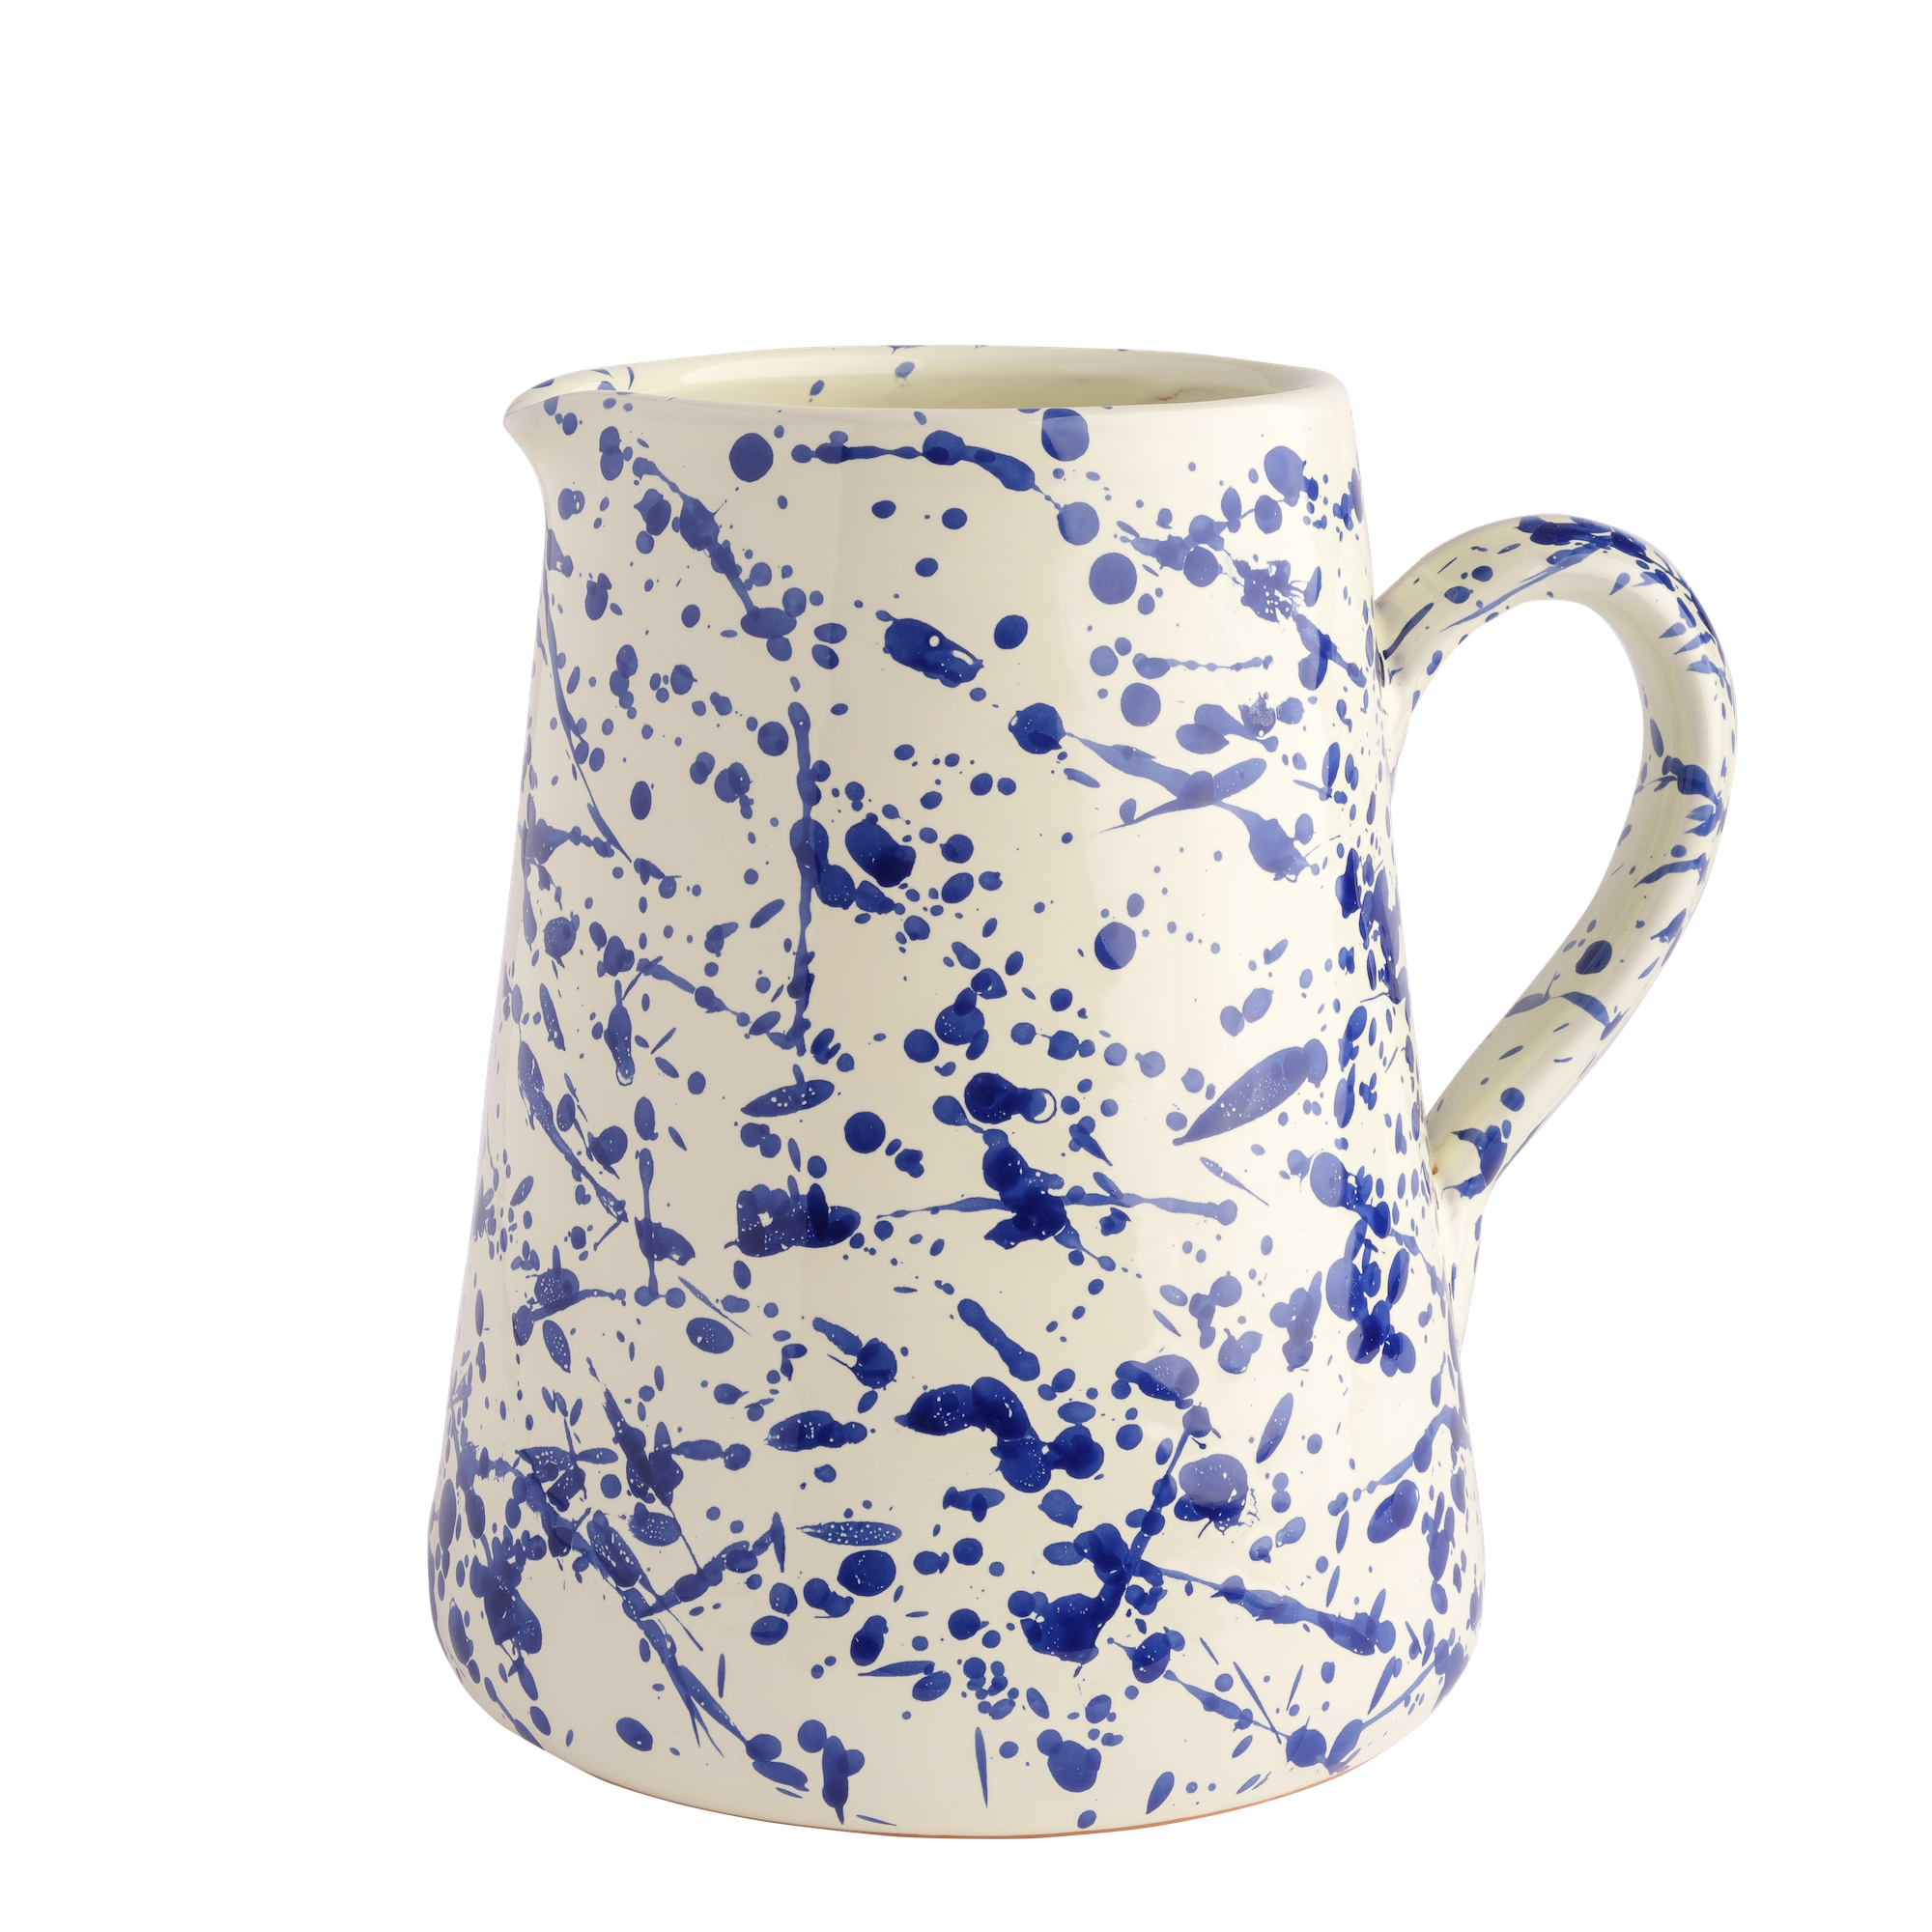 Hot Pottery jug in blueberry